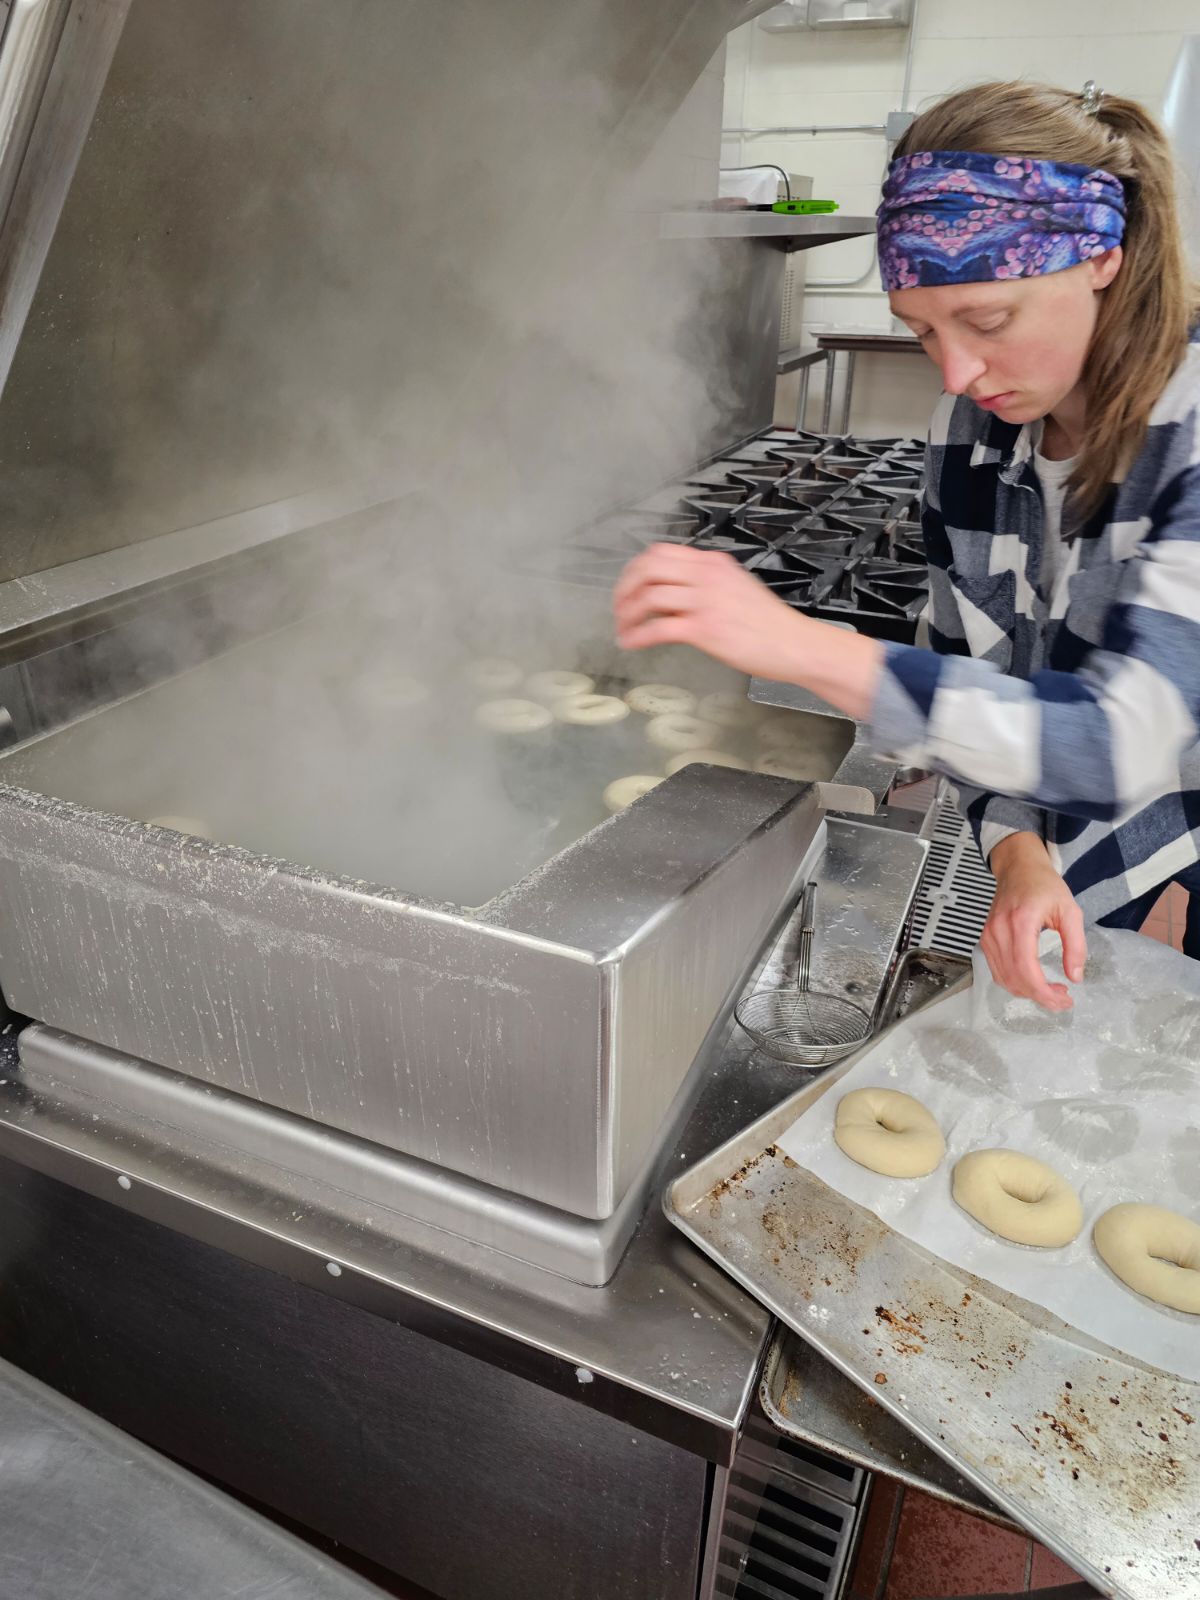 A person wearing a plaid shirt and a colorful headband is boiling bagels in an industrial kitchen. They are placing bagels into a large steaming pot on the stovetop. A tray with unboiled bagels is on the counter beside them.